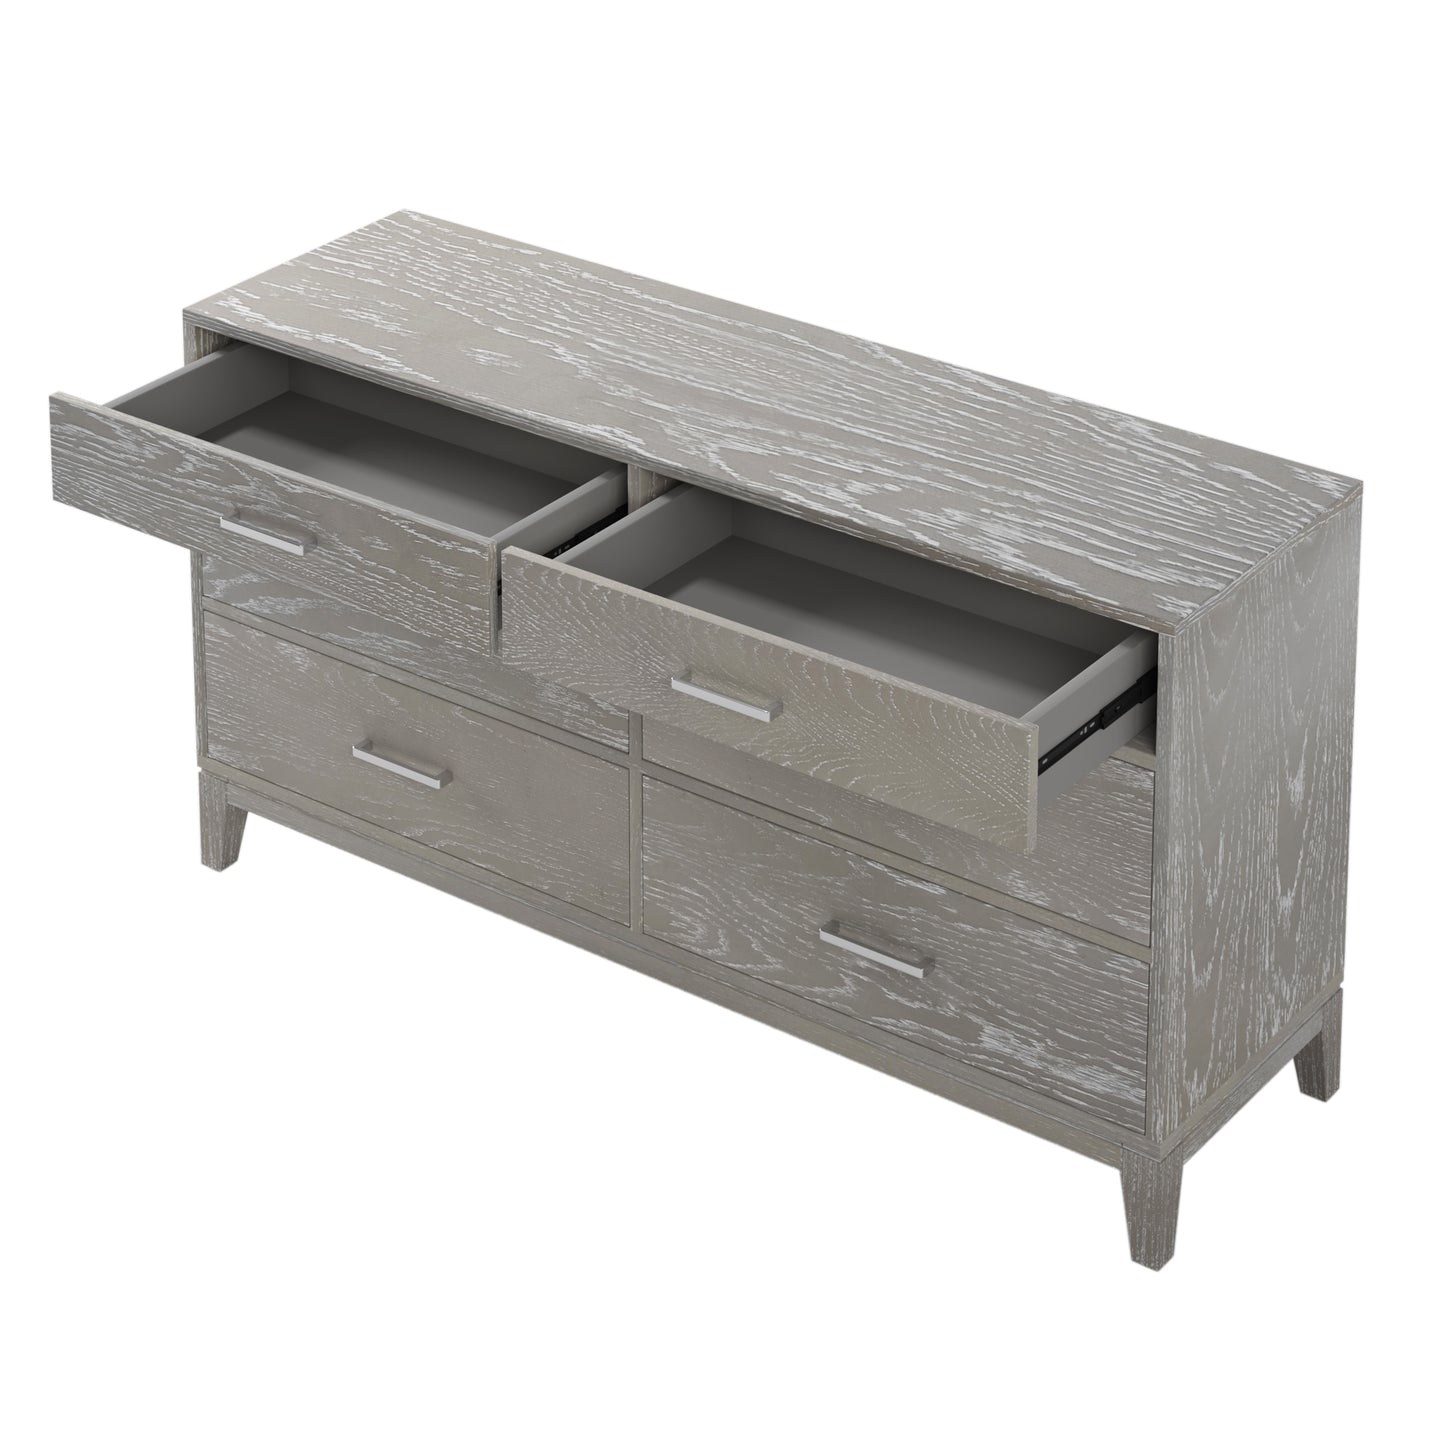 Modern Concise Style Gray Wood Grain Six-Drawer Dresser with Tapered Legs and Smooth Gliding Drawers